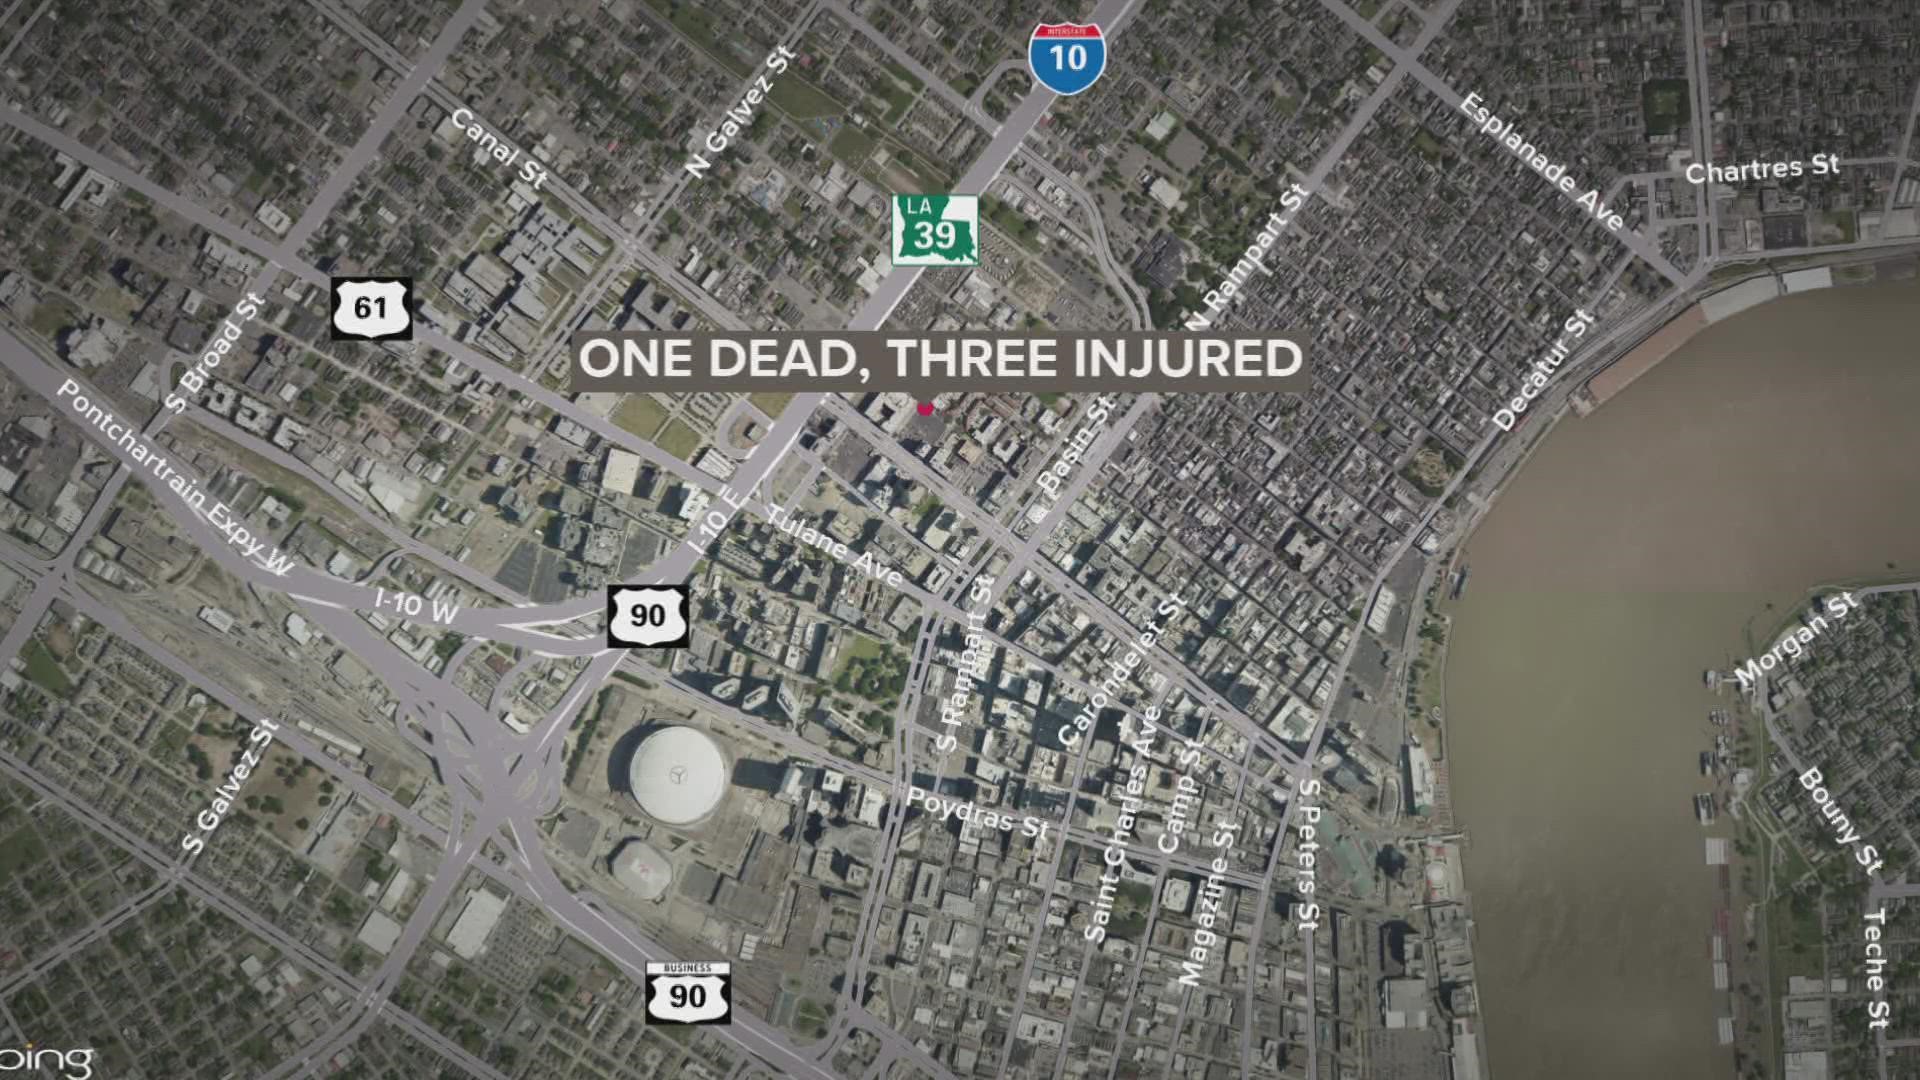 NOPD is investigating the shooting death of a teenage boy on Iberville street. That shooting injured three others.